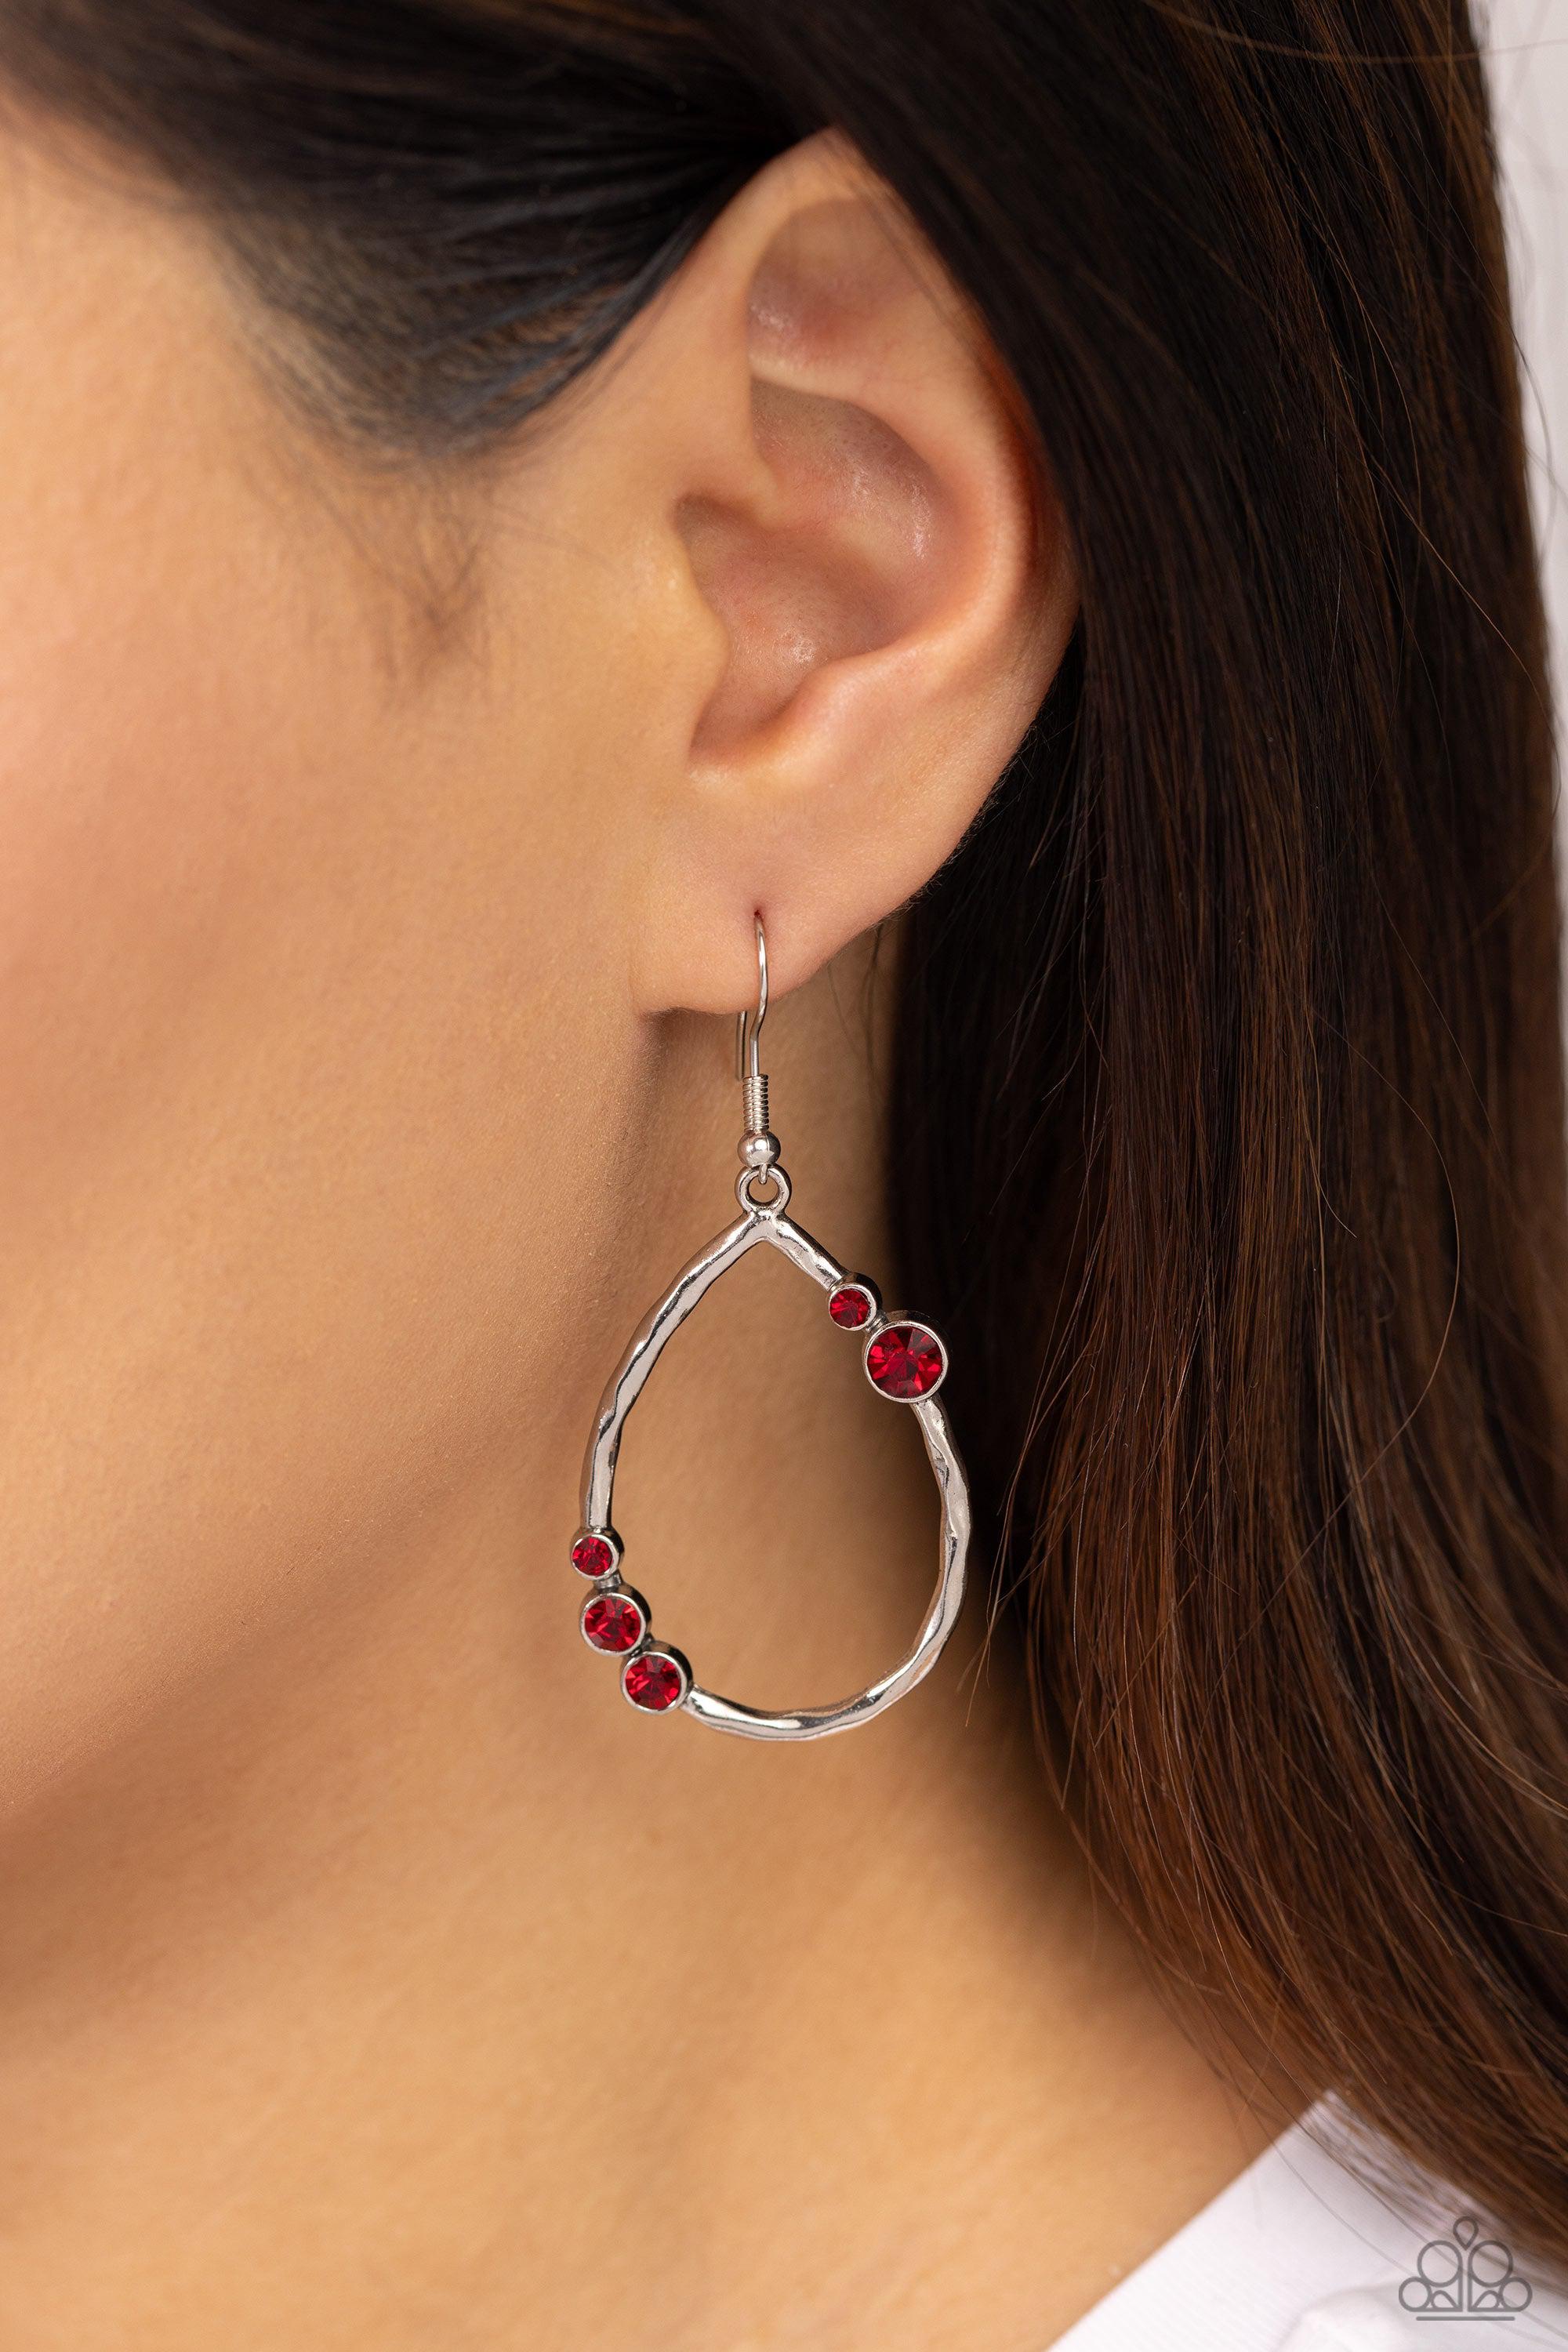 Shop Till You DROPLET Red Rhinestone Earrings - Paparazzi Accessories- lightbox - CarasShop.com - $5 Jewelry by Cara Jewels